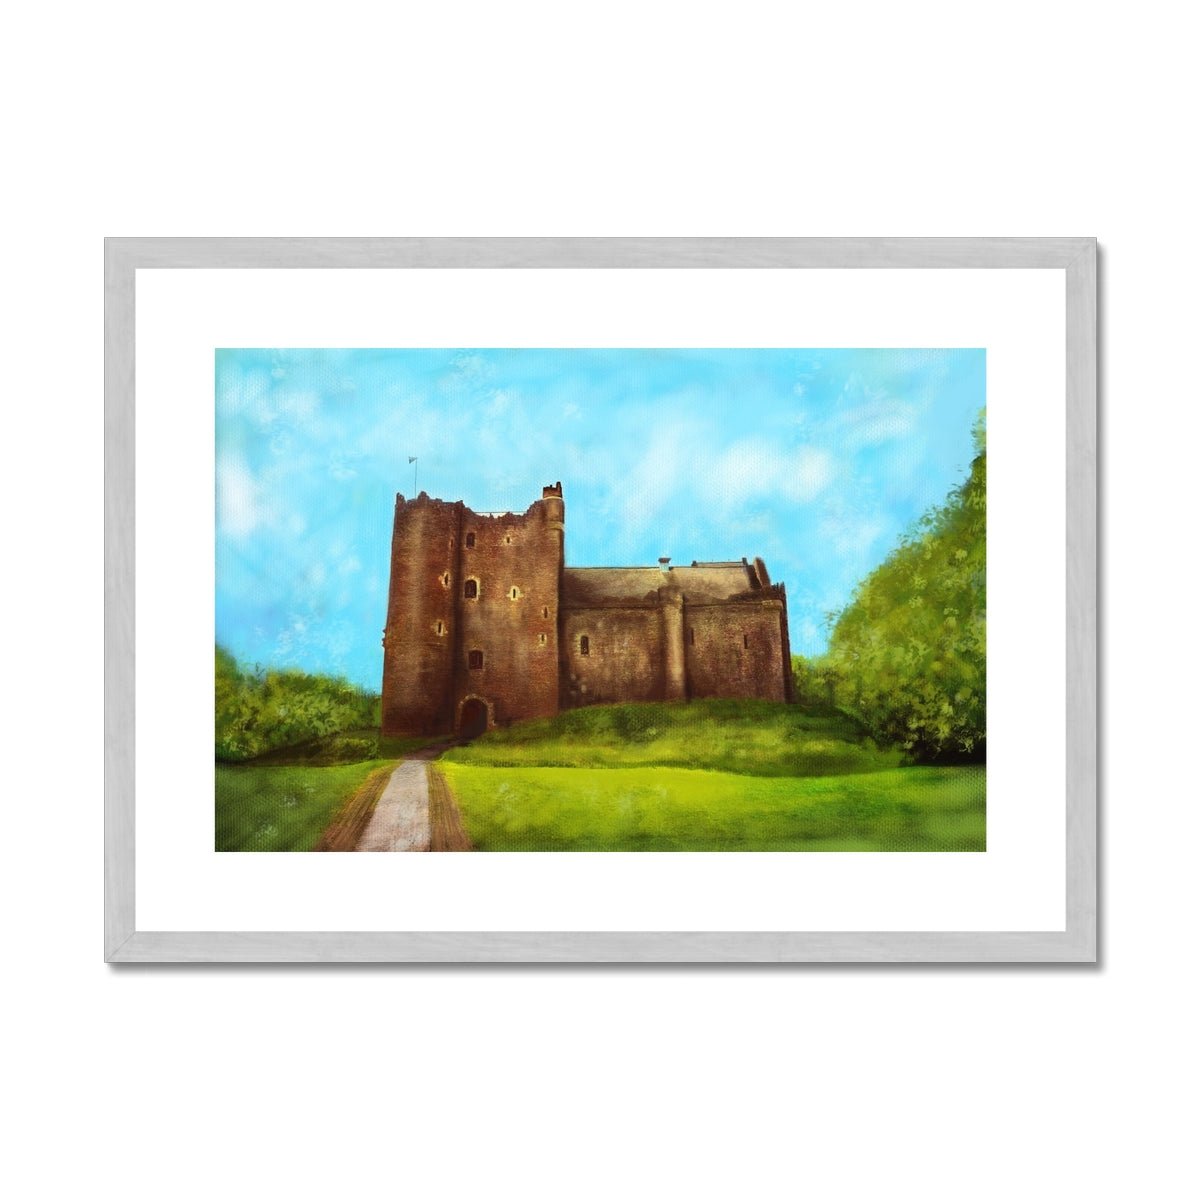 Doune Castle Painting | Antique Framed & Mounted Prints From Scotland-Antique Framed & Mounted Prints-Historic & Iconic Scotland Art Gallery-A2 Landscape-Silver Frame-Paintings, Prints, Homeware, Art Gifts From Scotland By Scottish Artist Kevin Hunter